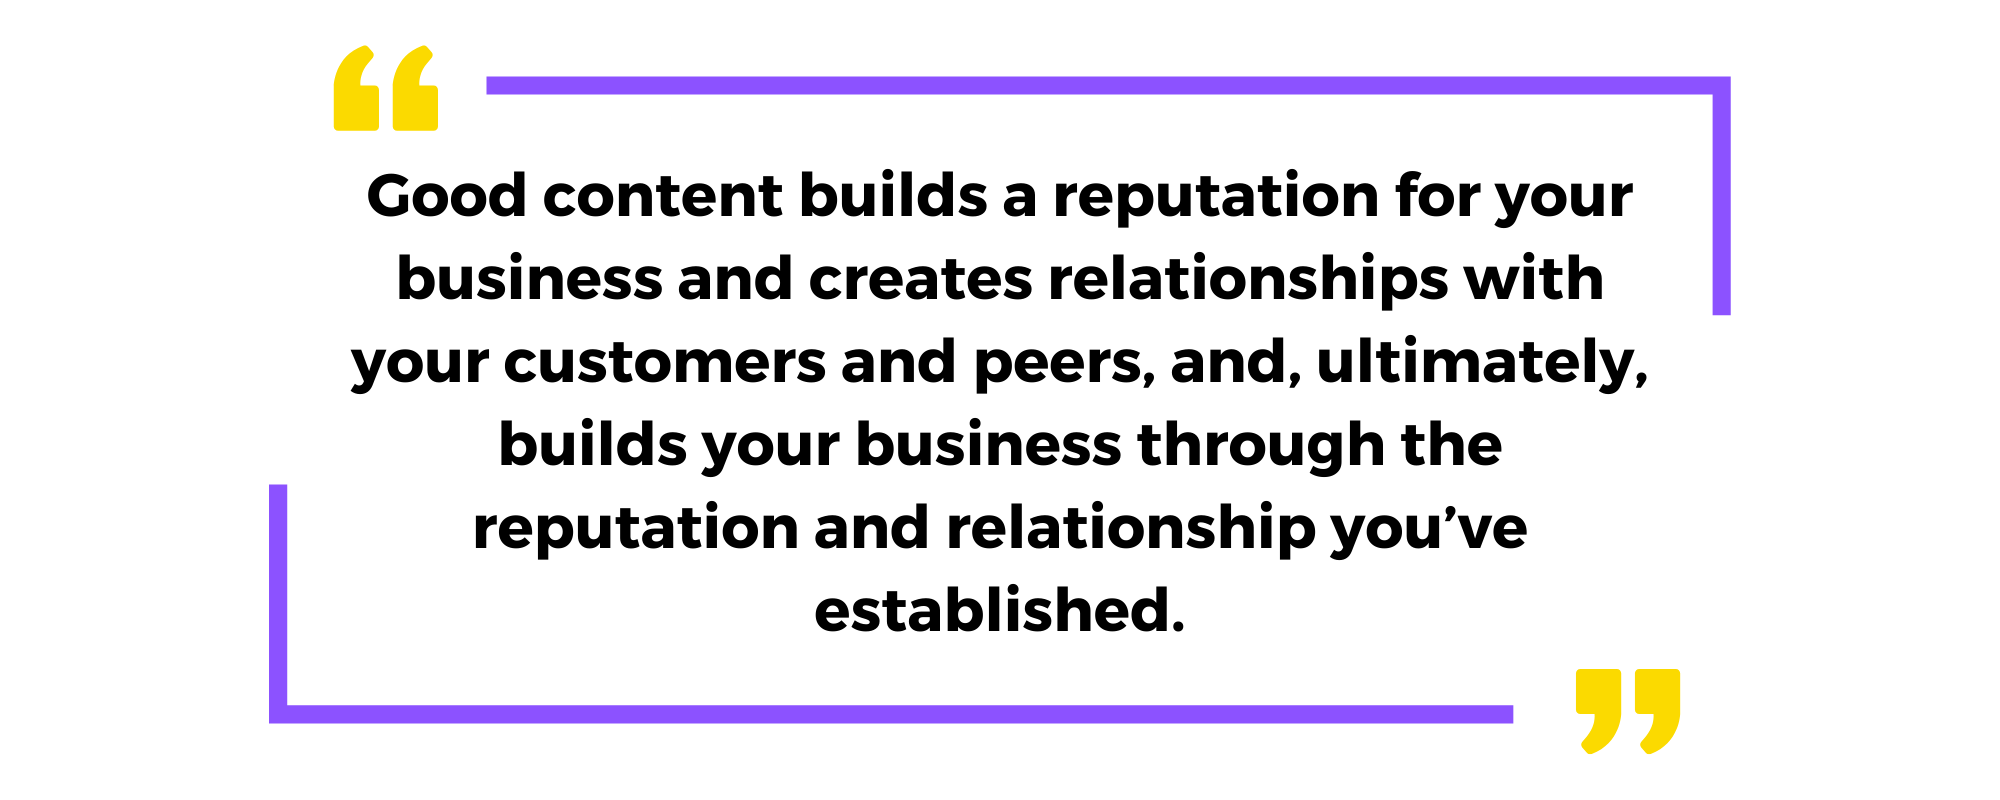 Good content builds a reputation for your business and creates relationships with your customers and peers, and, ultimately, builds your business through the reputation and relationship you’ve established.